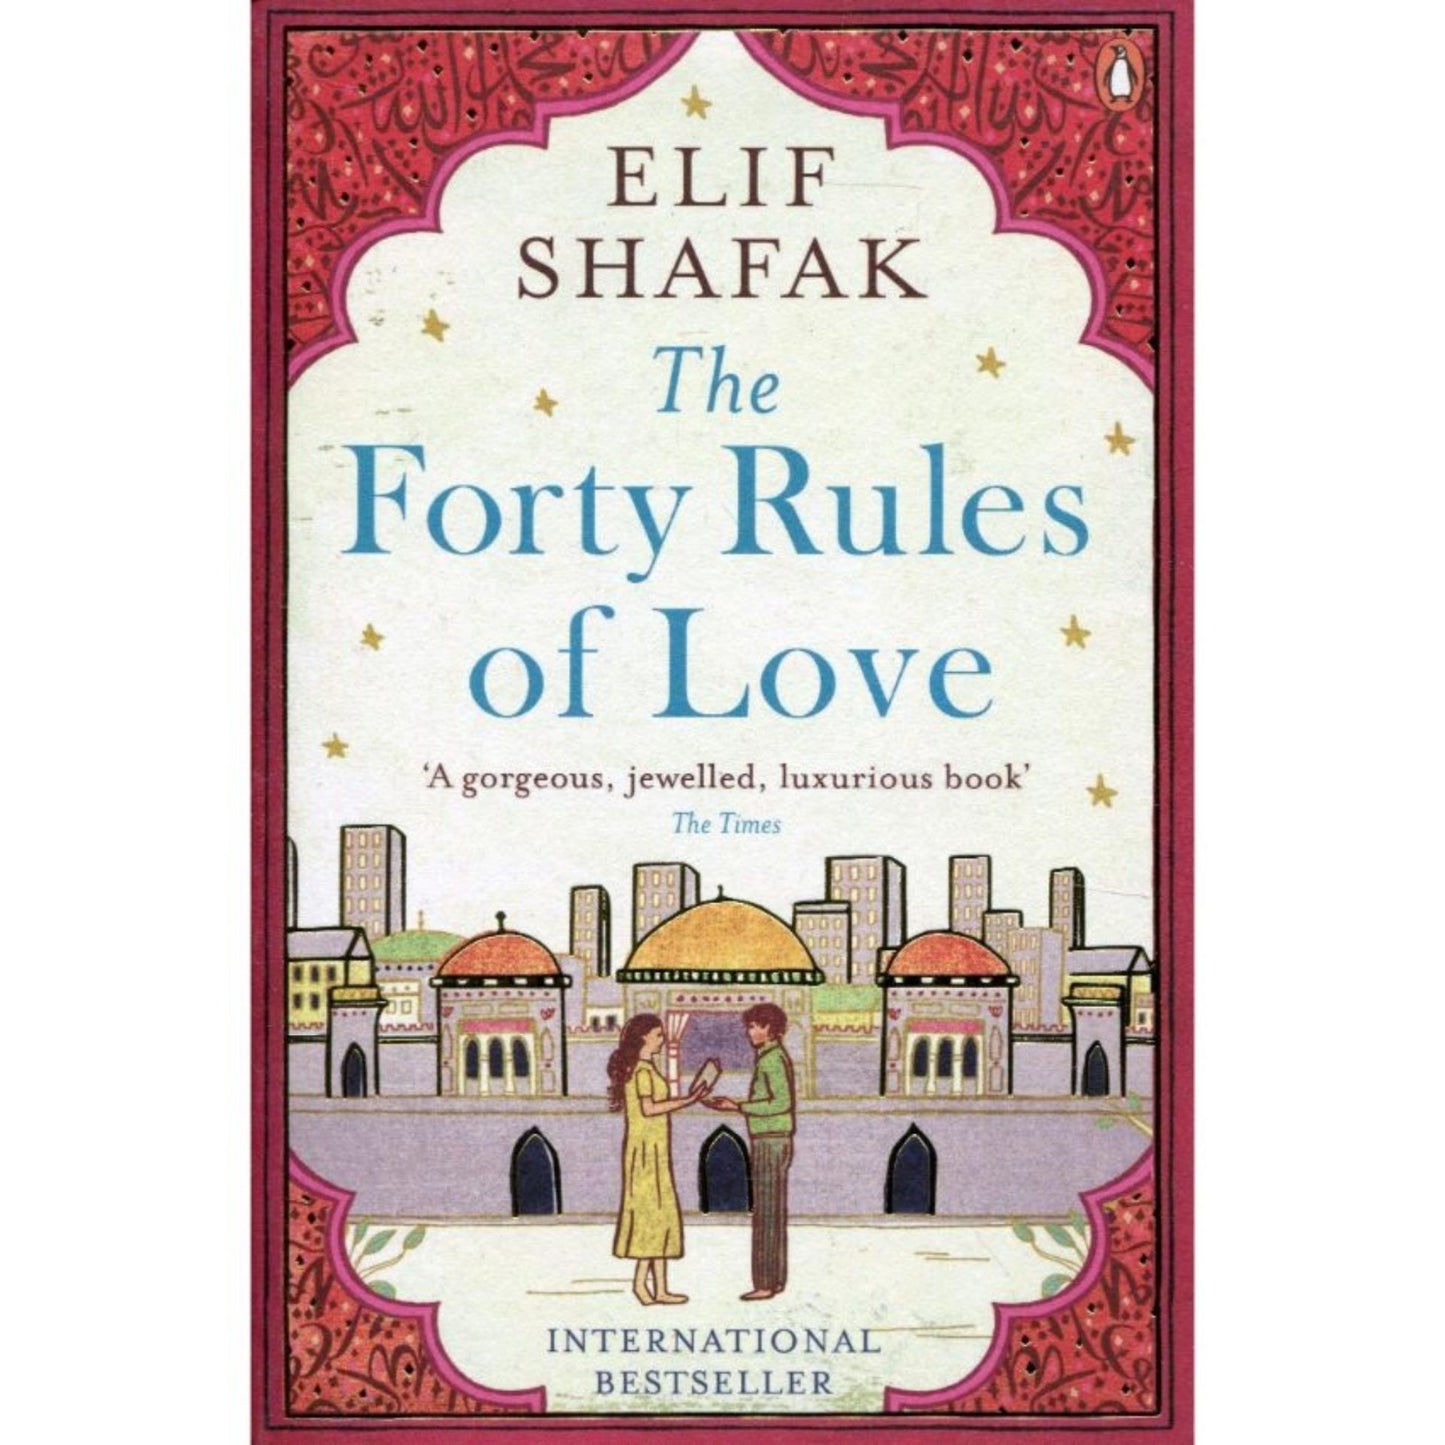 The Forty Rules Of Love by Elif Shafak (book)